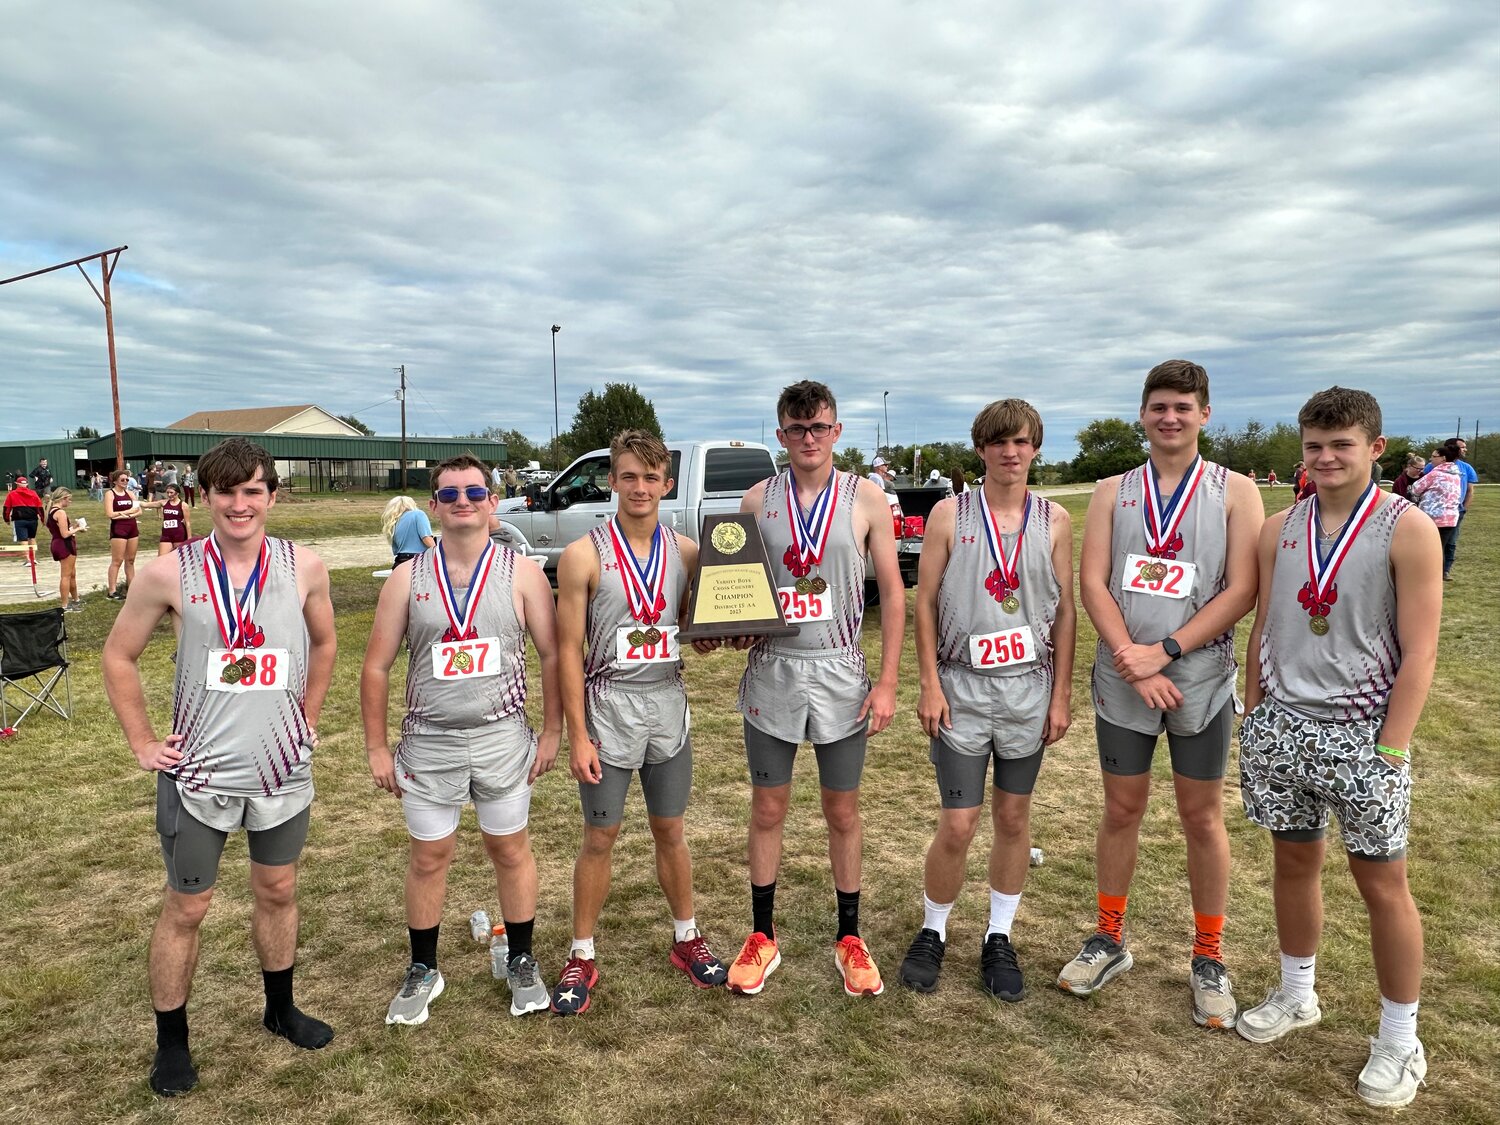 The Alba-Golden boys varsity cross country team won the district championship last week, edging North Hopkins. The team includes, from left, Hudson Wright, Collin Nichols, Brandt Peterson, Chandler Lee, Zach Morris, Drake Duplechain and Logan Strong.  They will compete at the regional meet to be held on Oct. 24 at Lynn Creek Park in Grand Prairie.